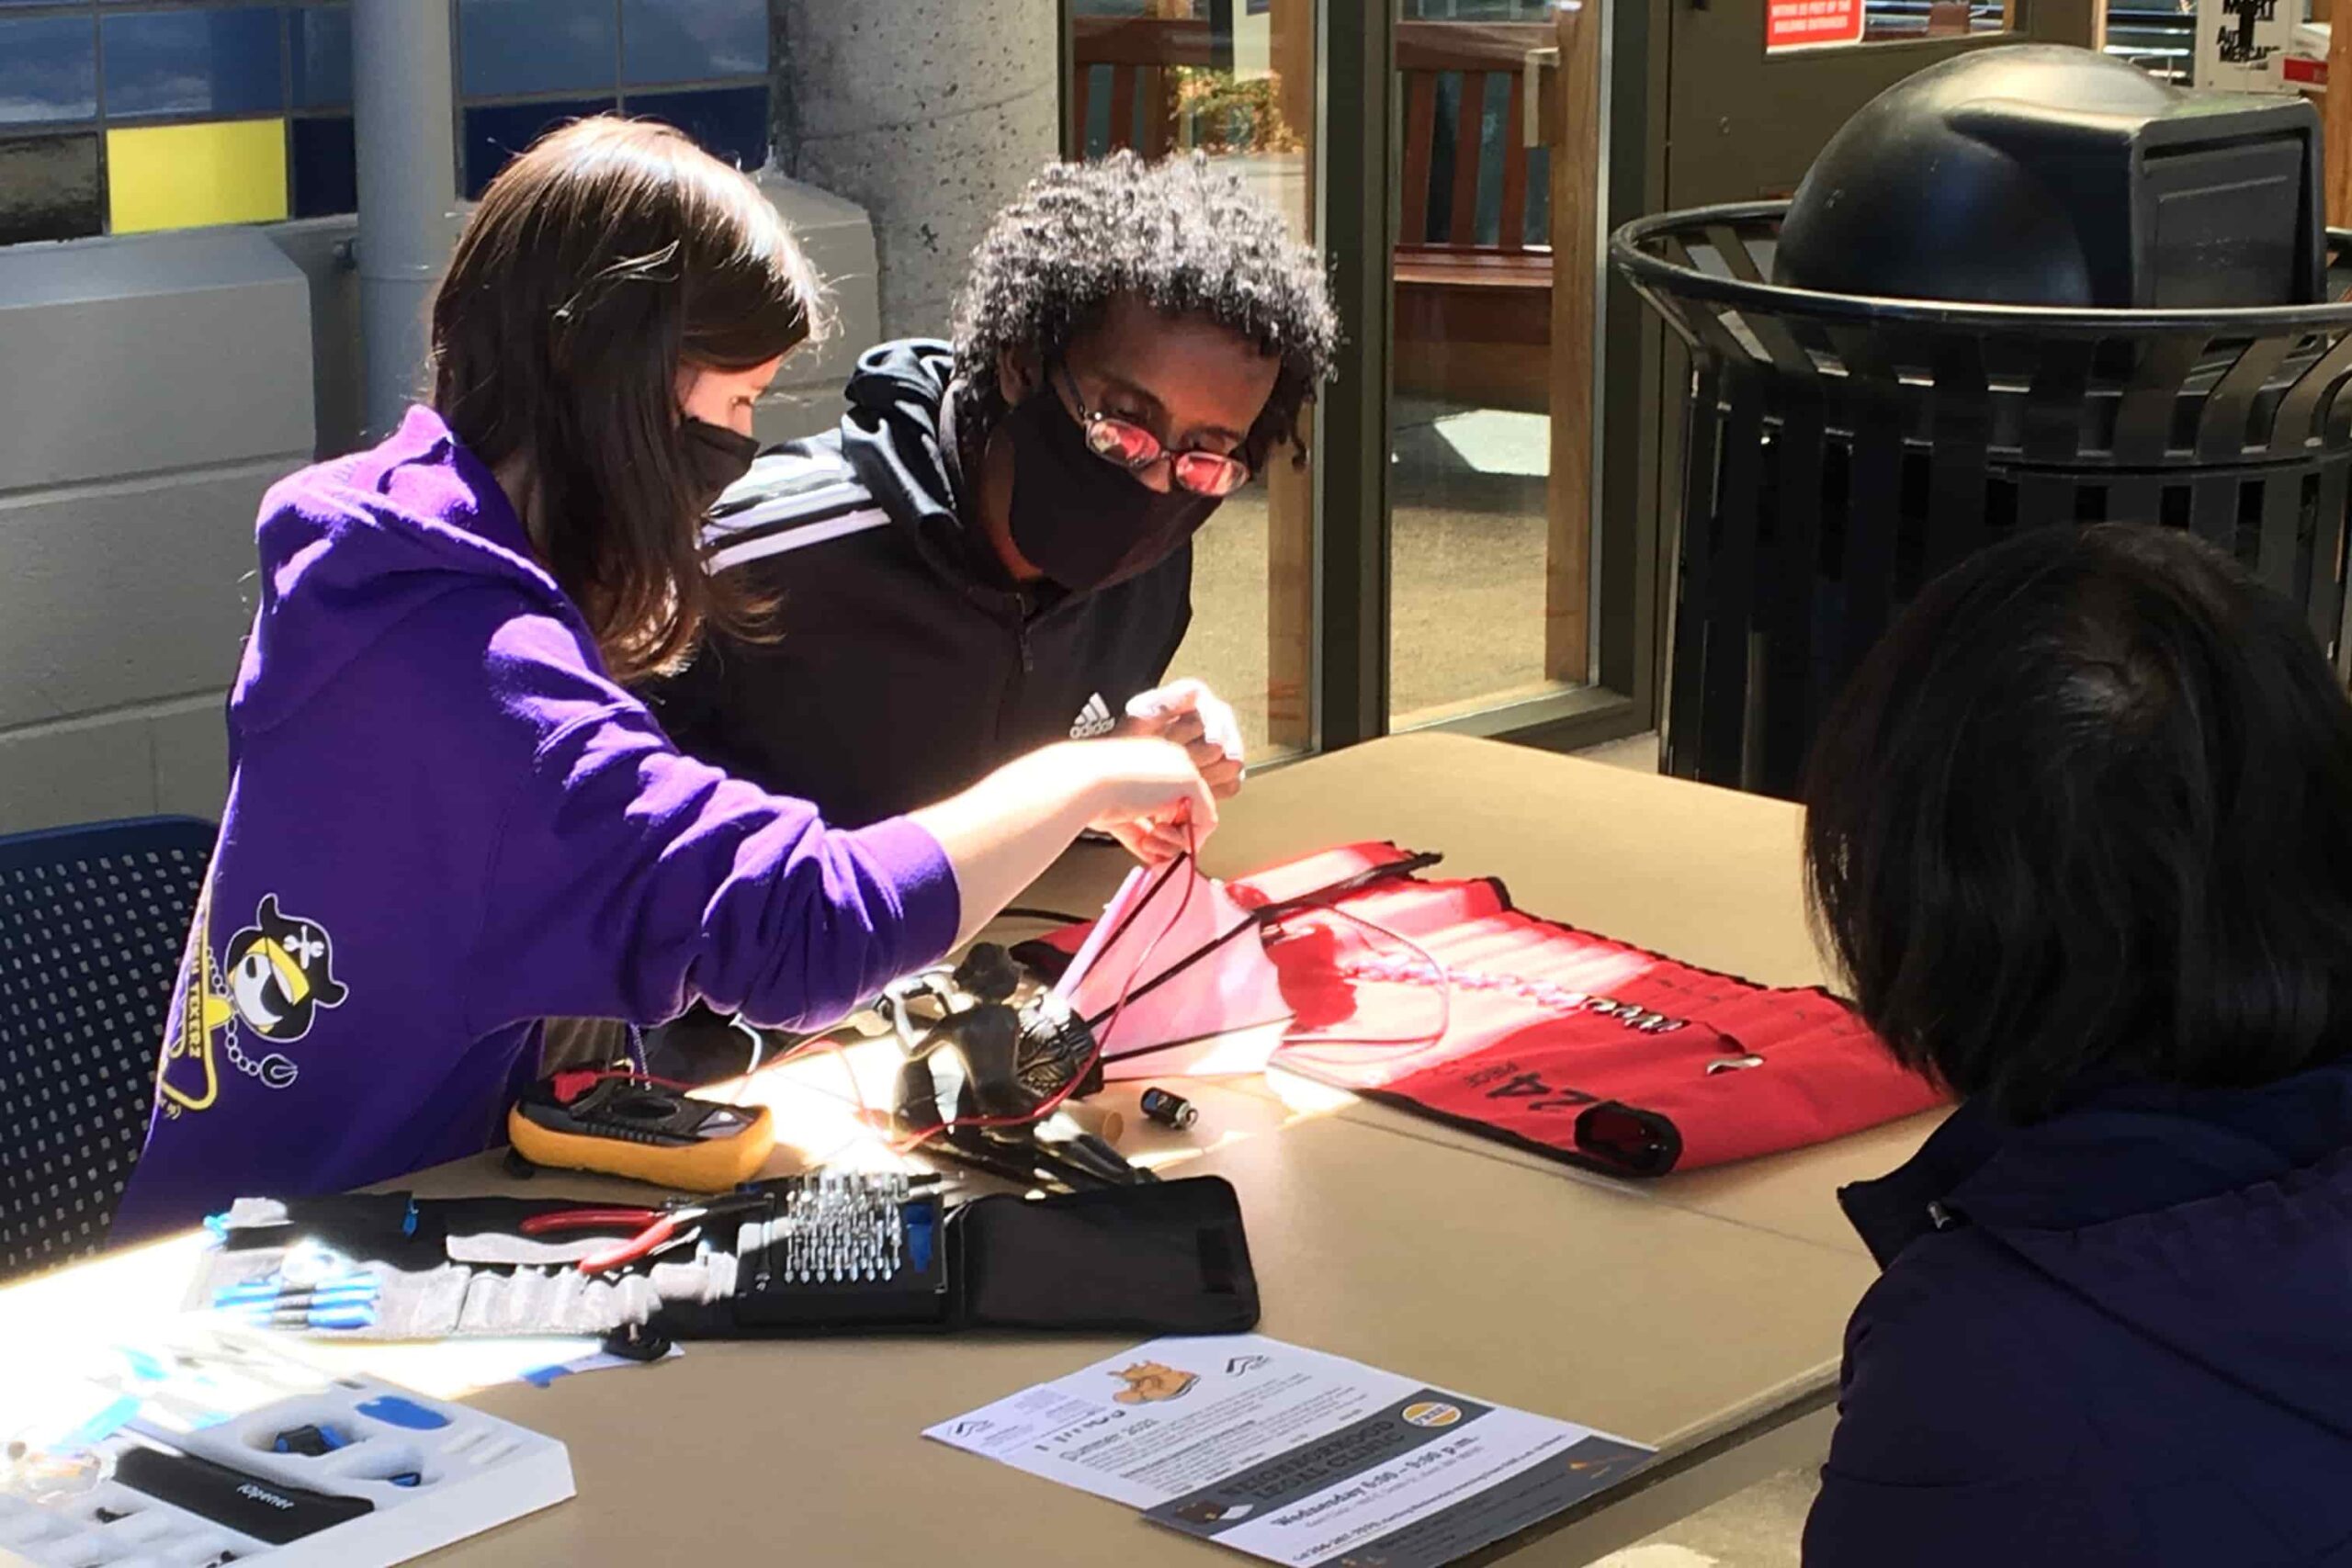 Fixers at King County's Fix-it-Fair work on a project.